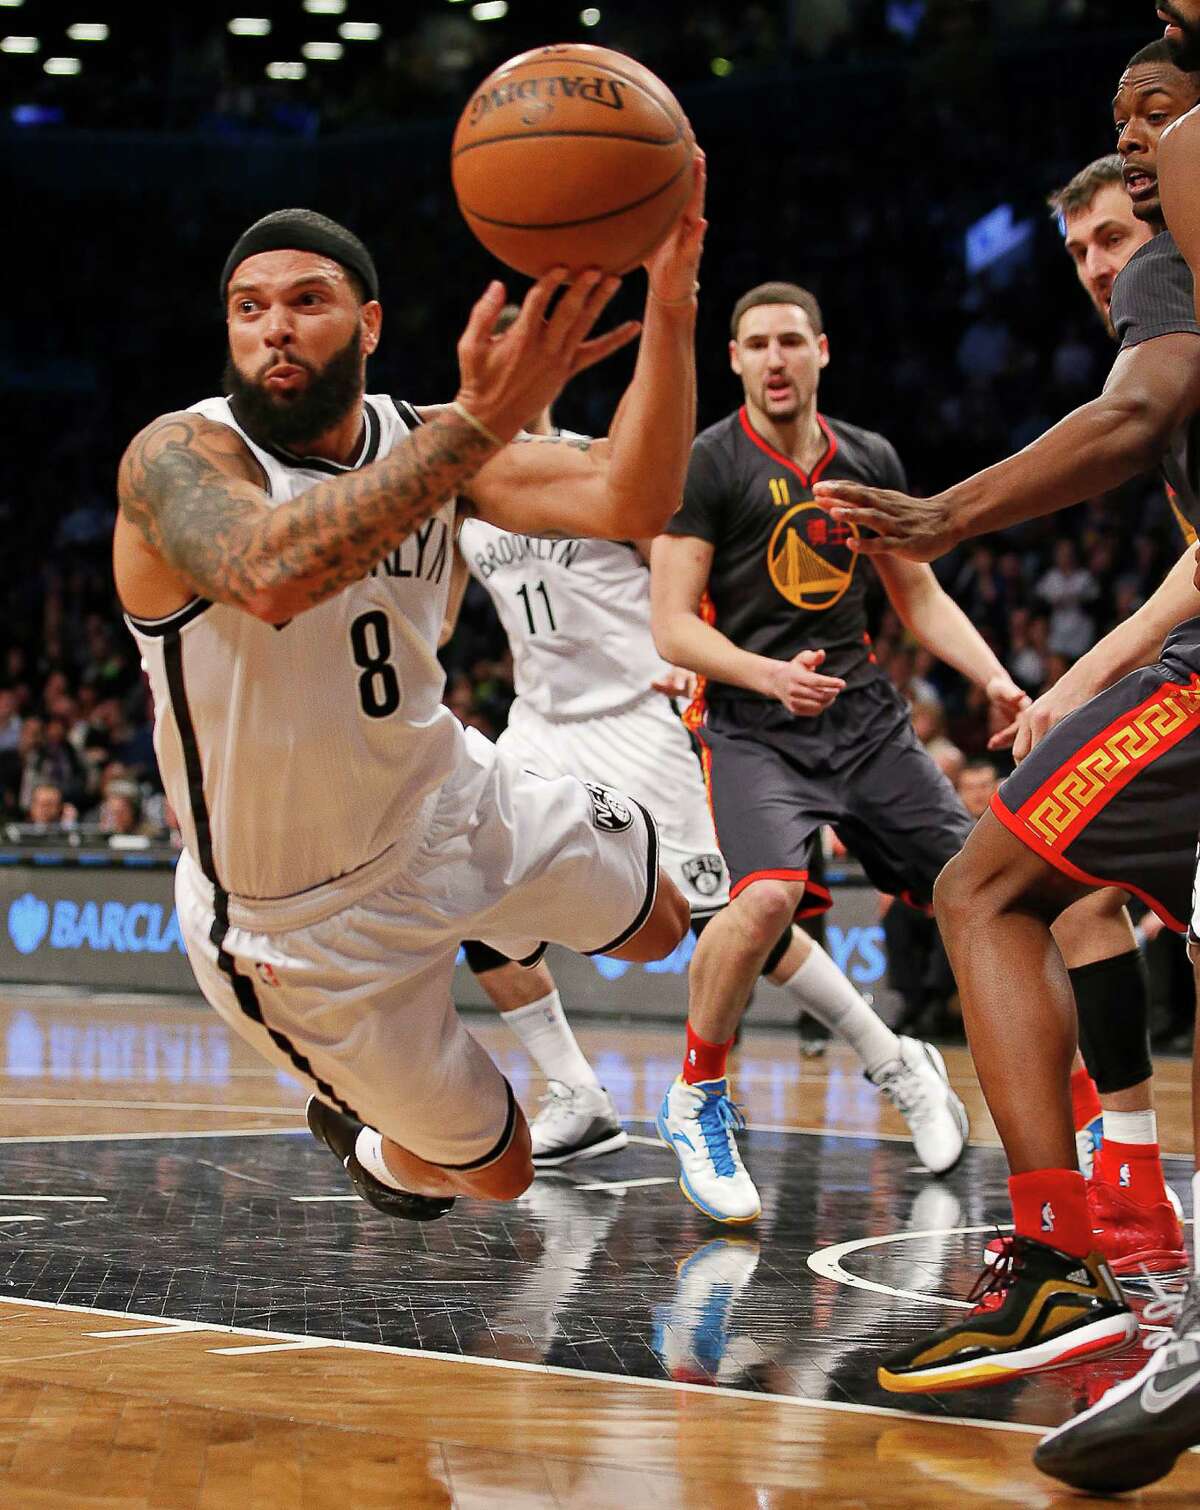 Brooklyn Nets guard Deron Williams (8) looks to pass to the perimeter as he falls to the floor in the second half of an NBA basketball game against the Golden State Warriors at the Barclays Center, Monday, March 2, 2015, in New York. Williams had 22 points as the Nets defeated the Warriors 110-108. (AP Photo/Kathy Willens)